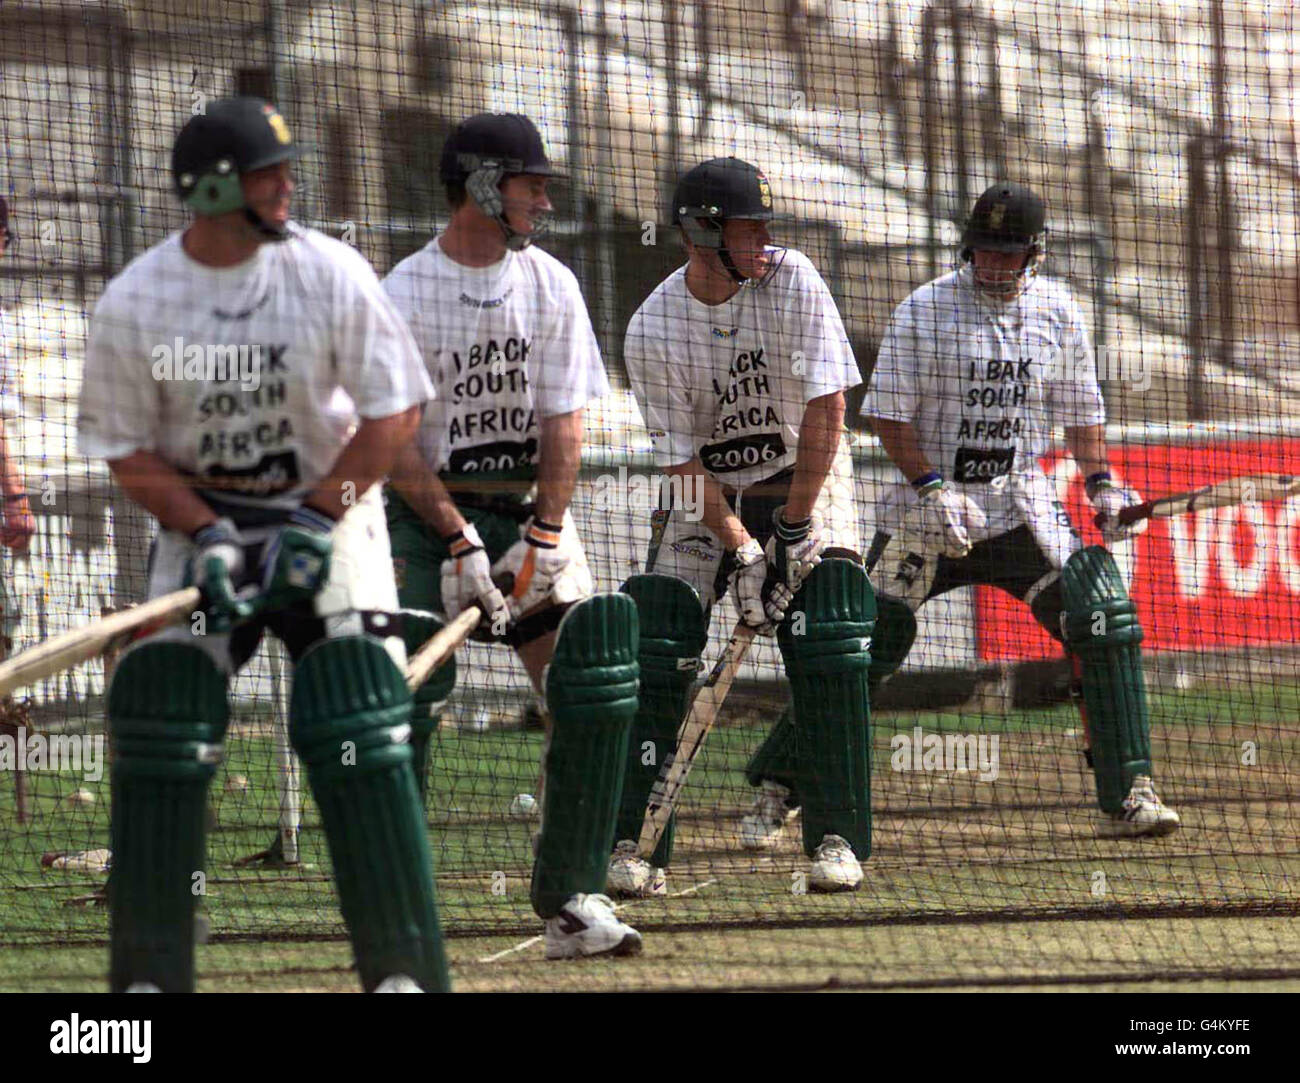 South African batsmen, have a clear message on their t-shirts during net practice at The Oval cricket ground, prior to their Cricker World Cup match against England. Stock Photo